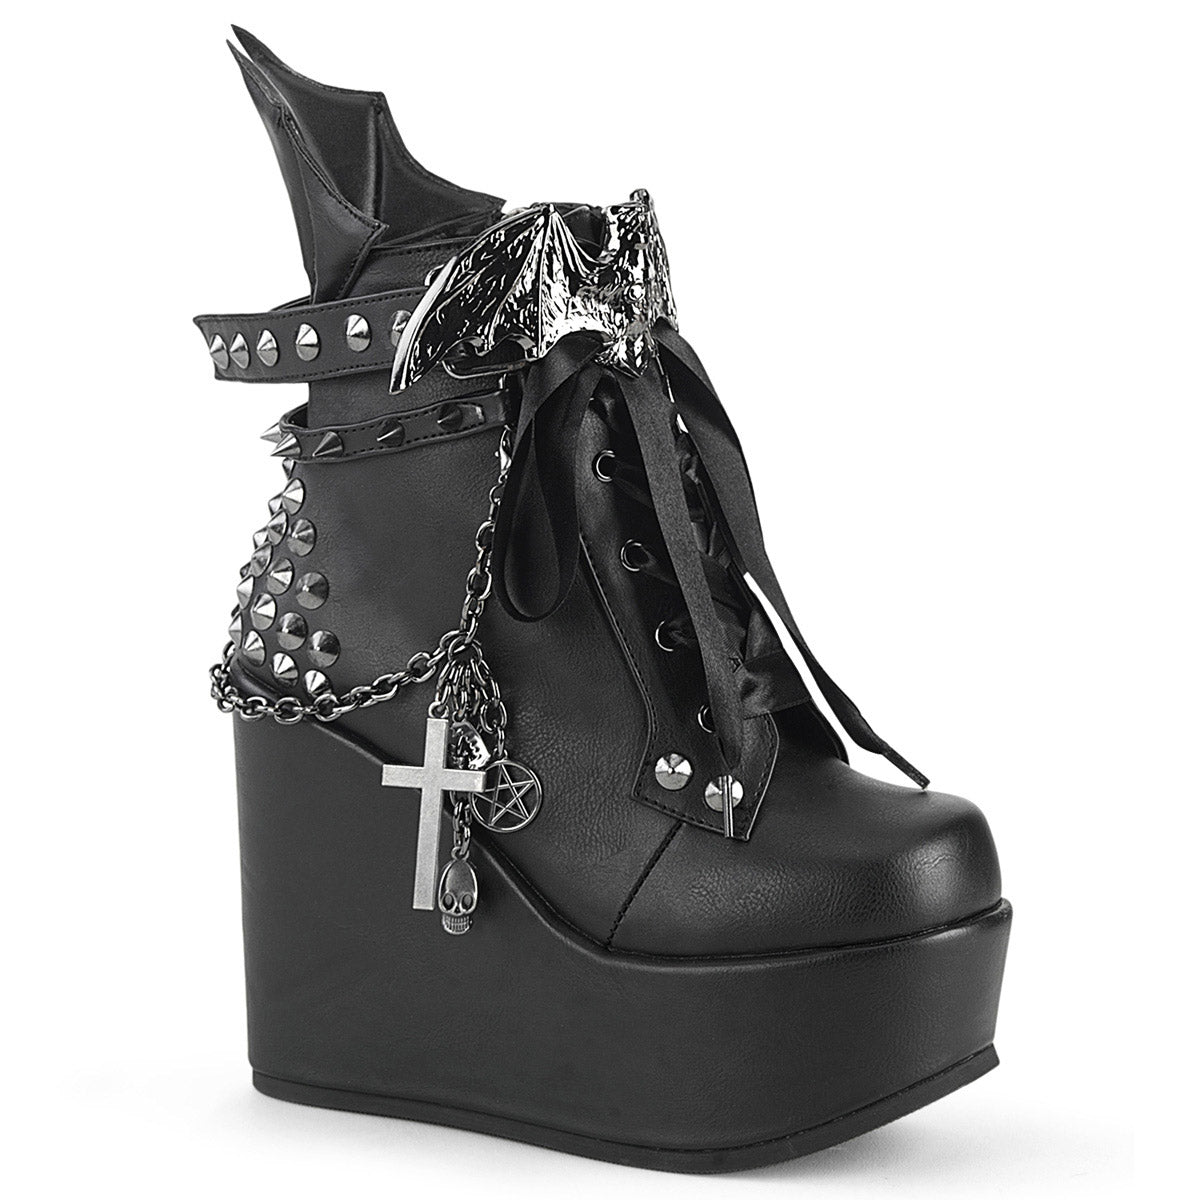 5" Wedge PF Boot w/Straps, Studs, Assorted Charms, Chain Pleaser Demonia POISON/107